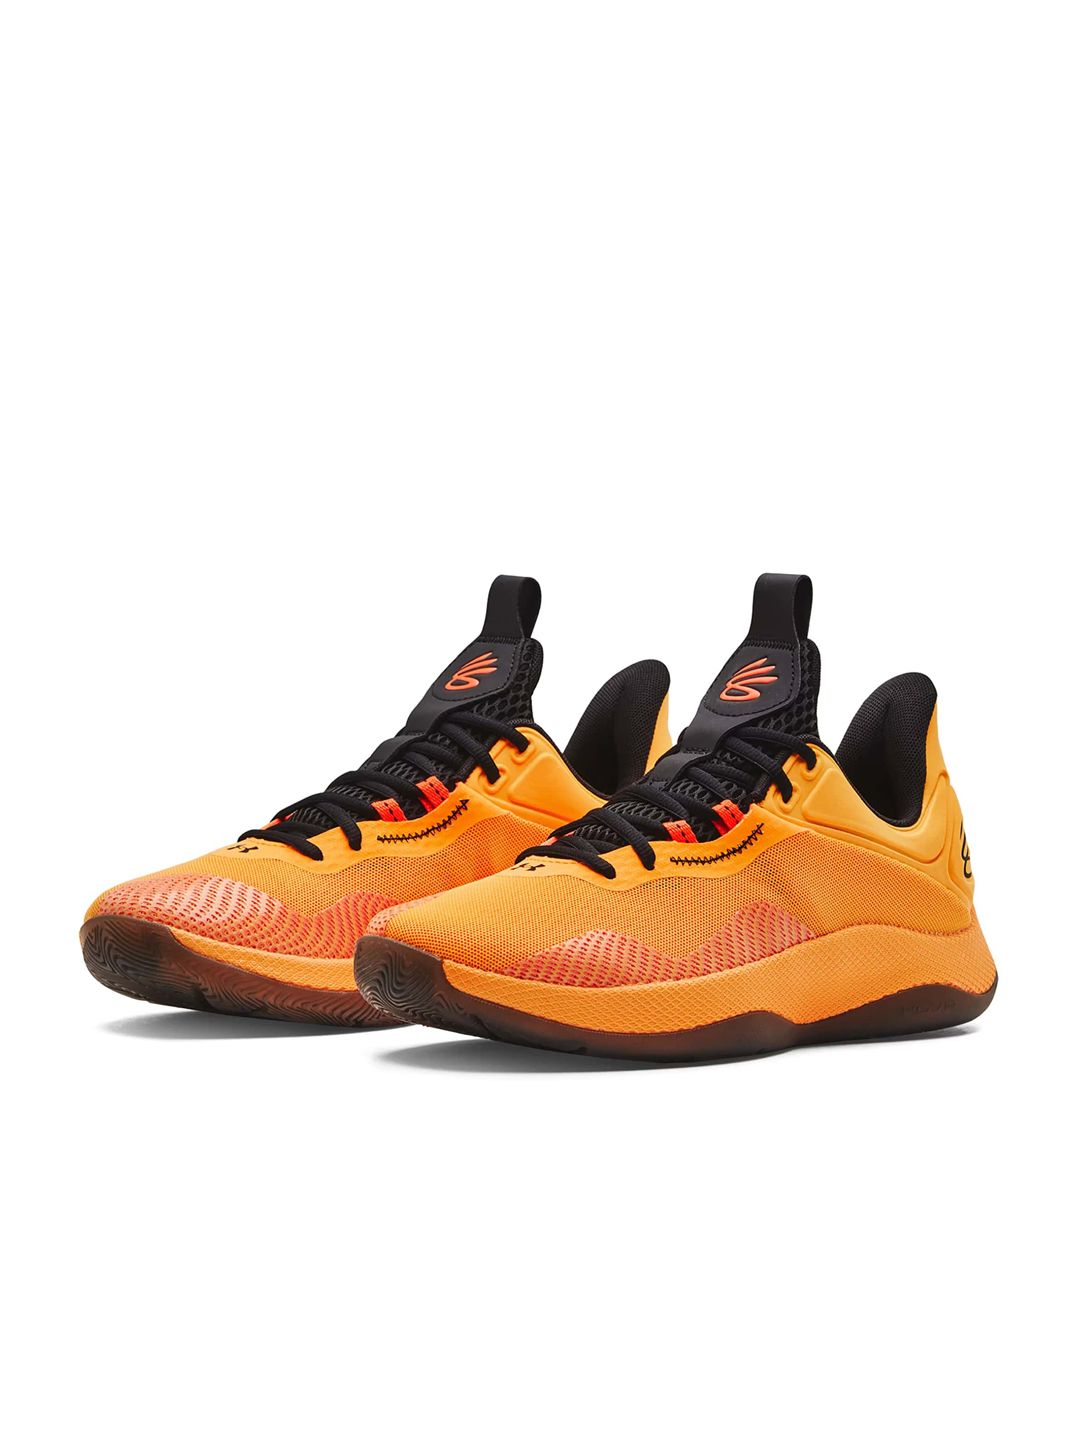 UNDER ARMOUR Unisex Woven Design Curry HOVR Splash 2 Basketball Shoes Price in India